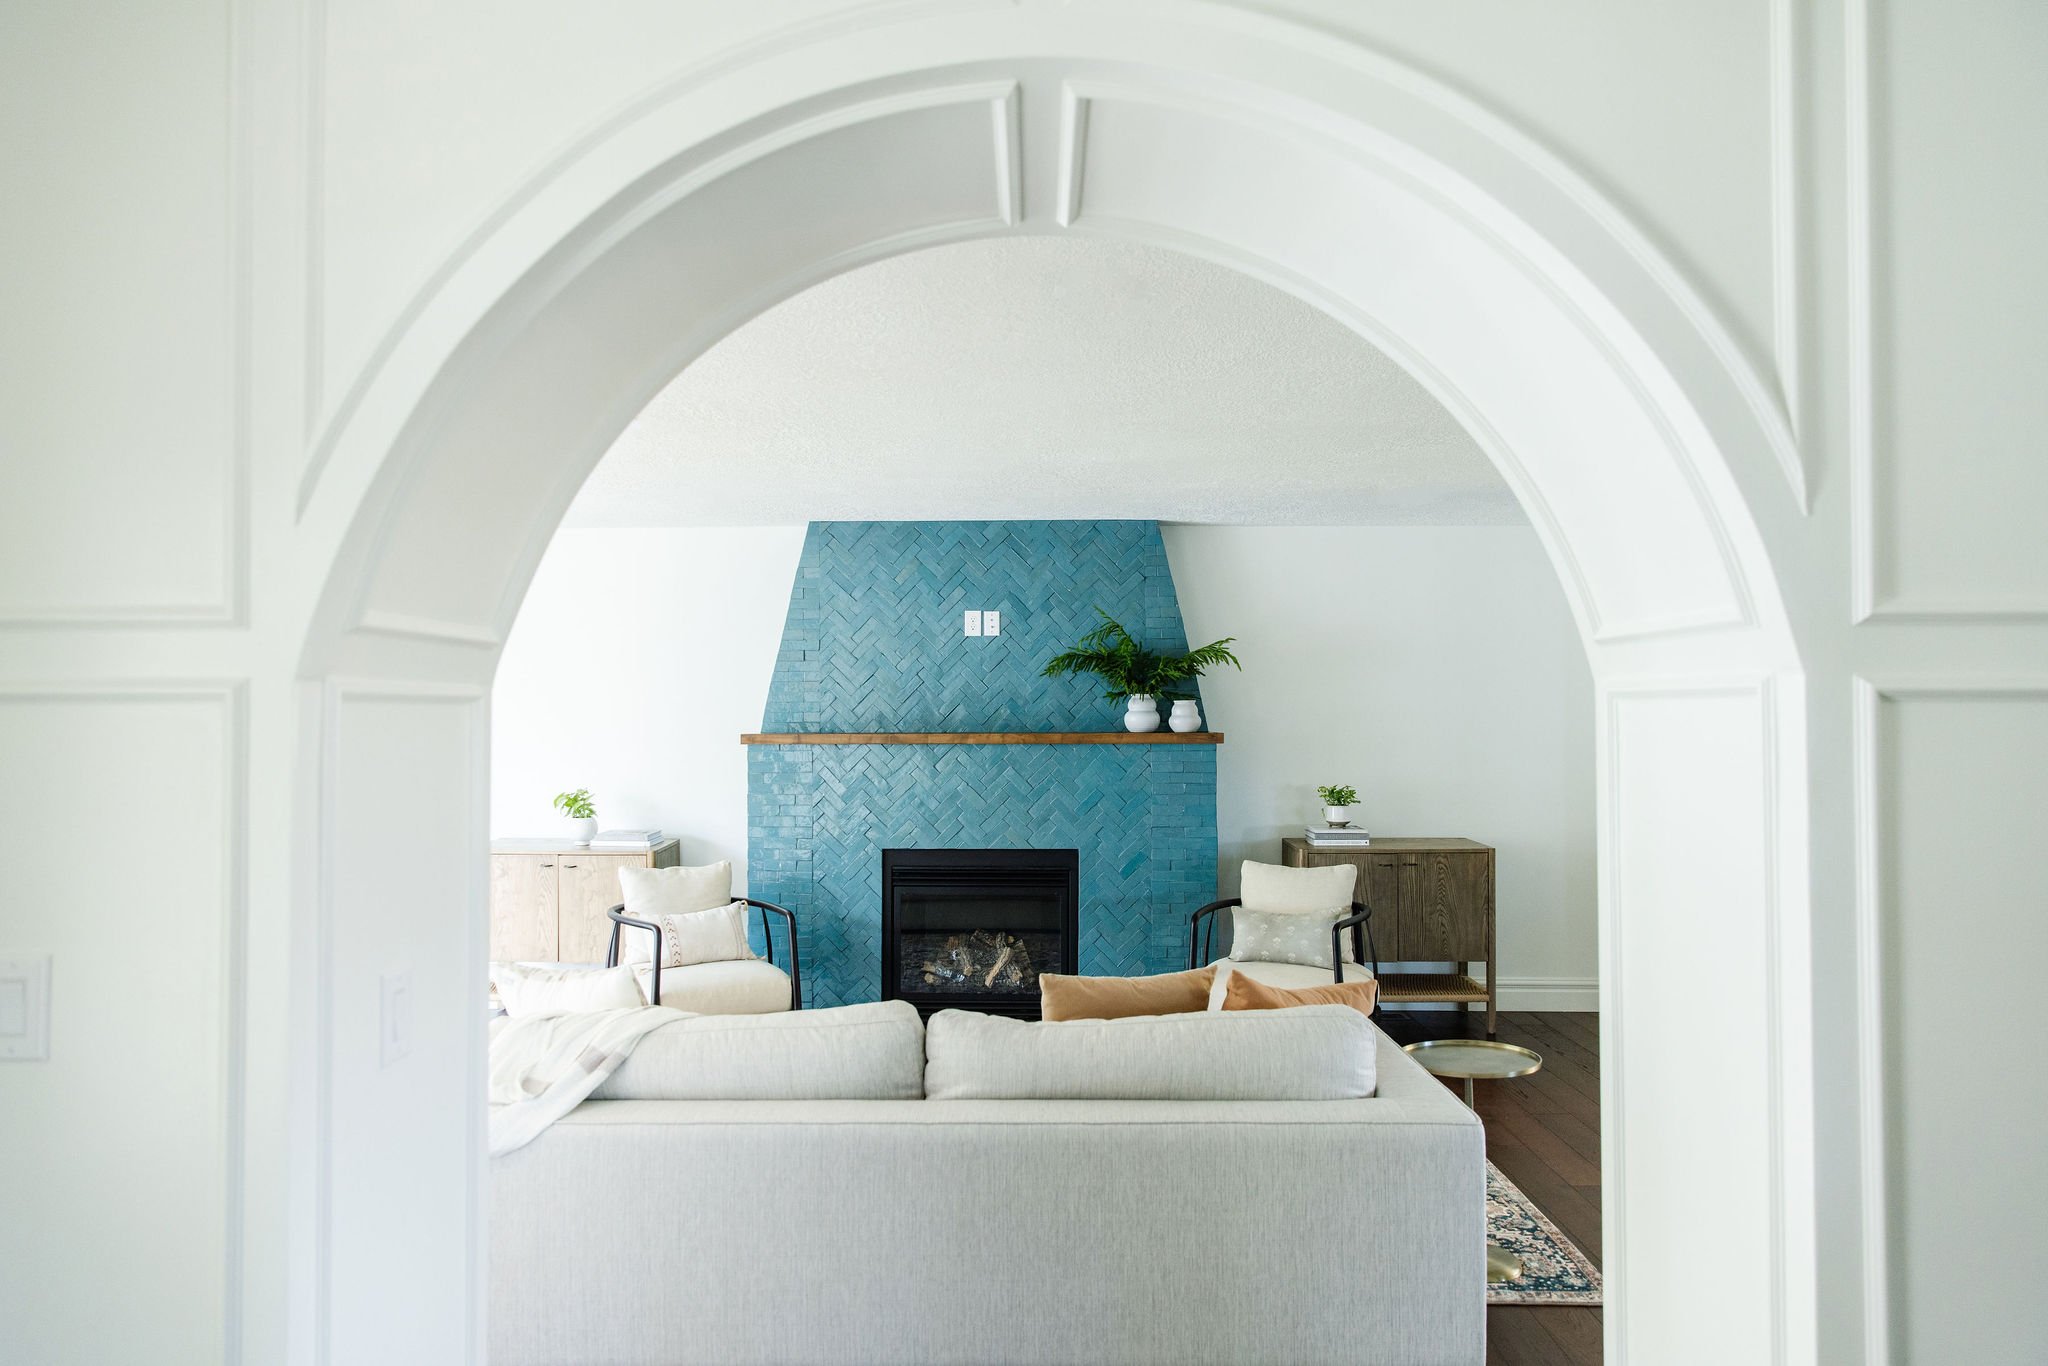  Detailed wainscot archway frames exquisite teal fireplace in a home designed by Liz Powell. teal fireplace arched entryway herringbone tile Logan Utah #tealfireplace #archeddoorway #wainscoting #livingroomdesign 